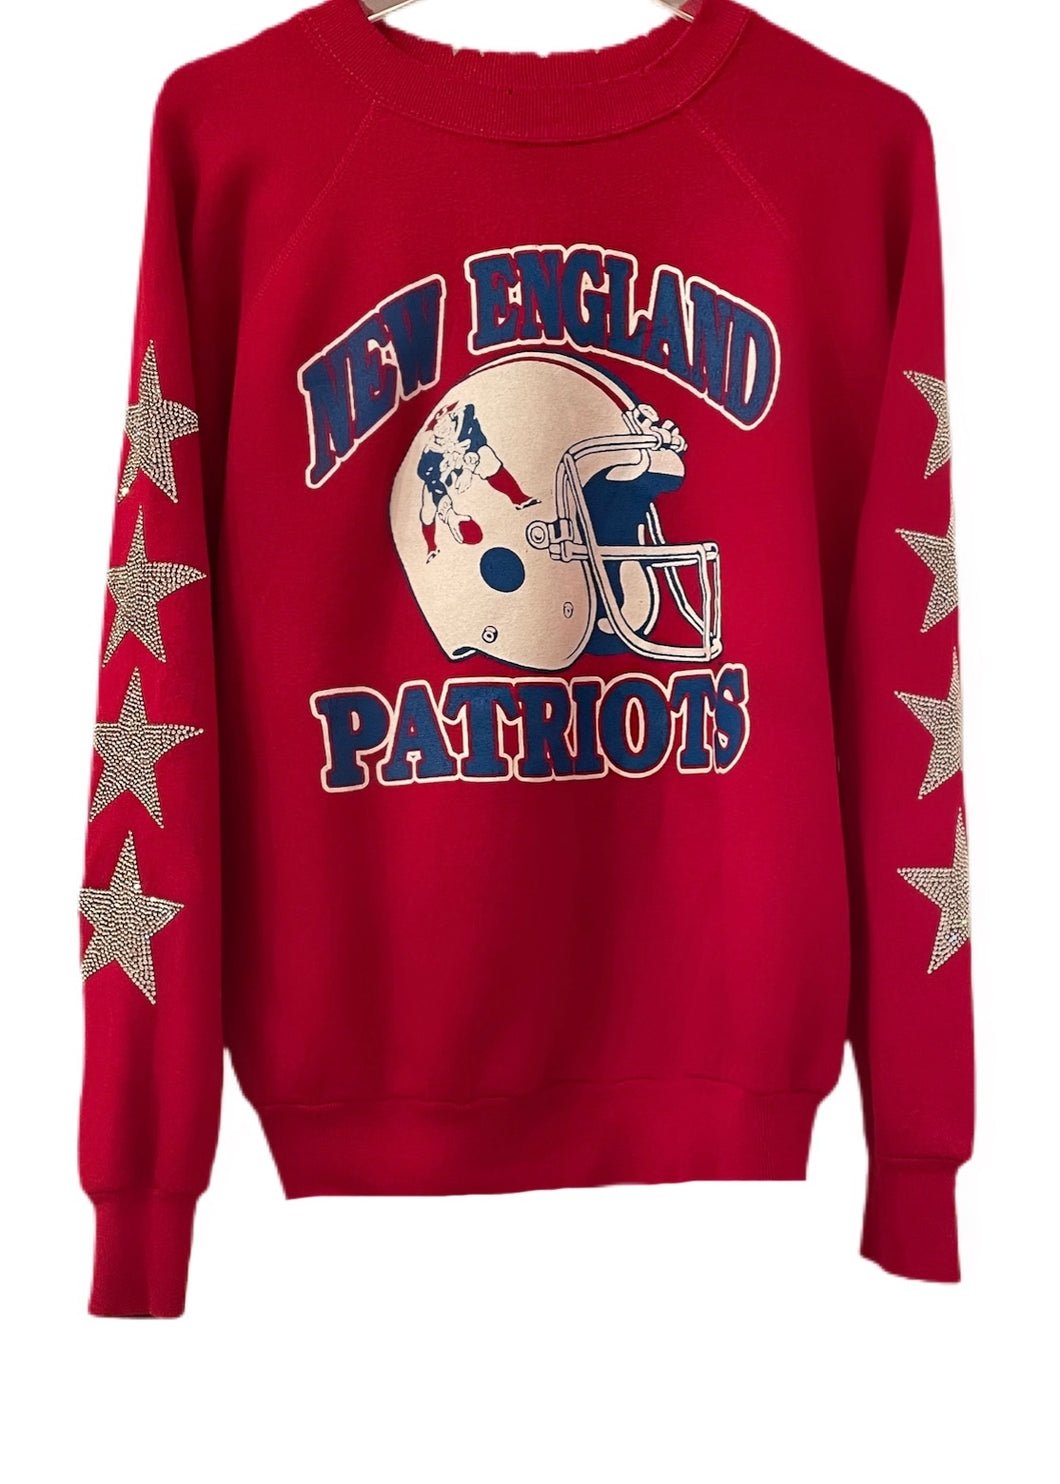 New England Patriots, NFL One of a KIND Vintage Sweatshirt with Four Crystal Star Design